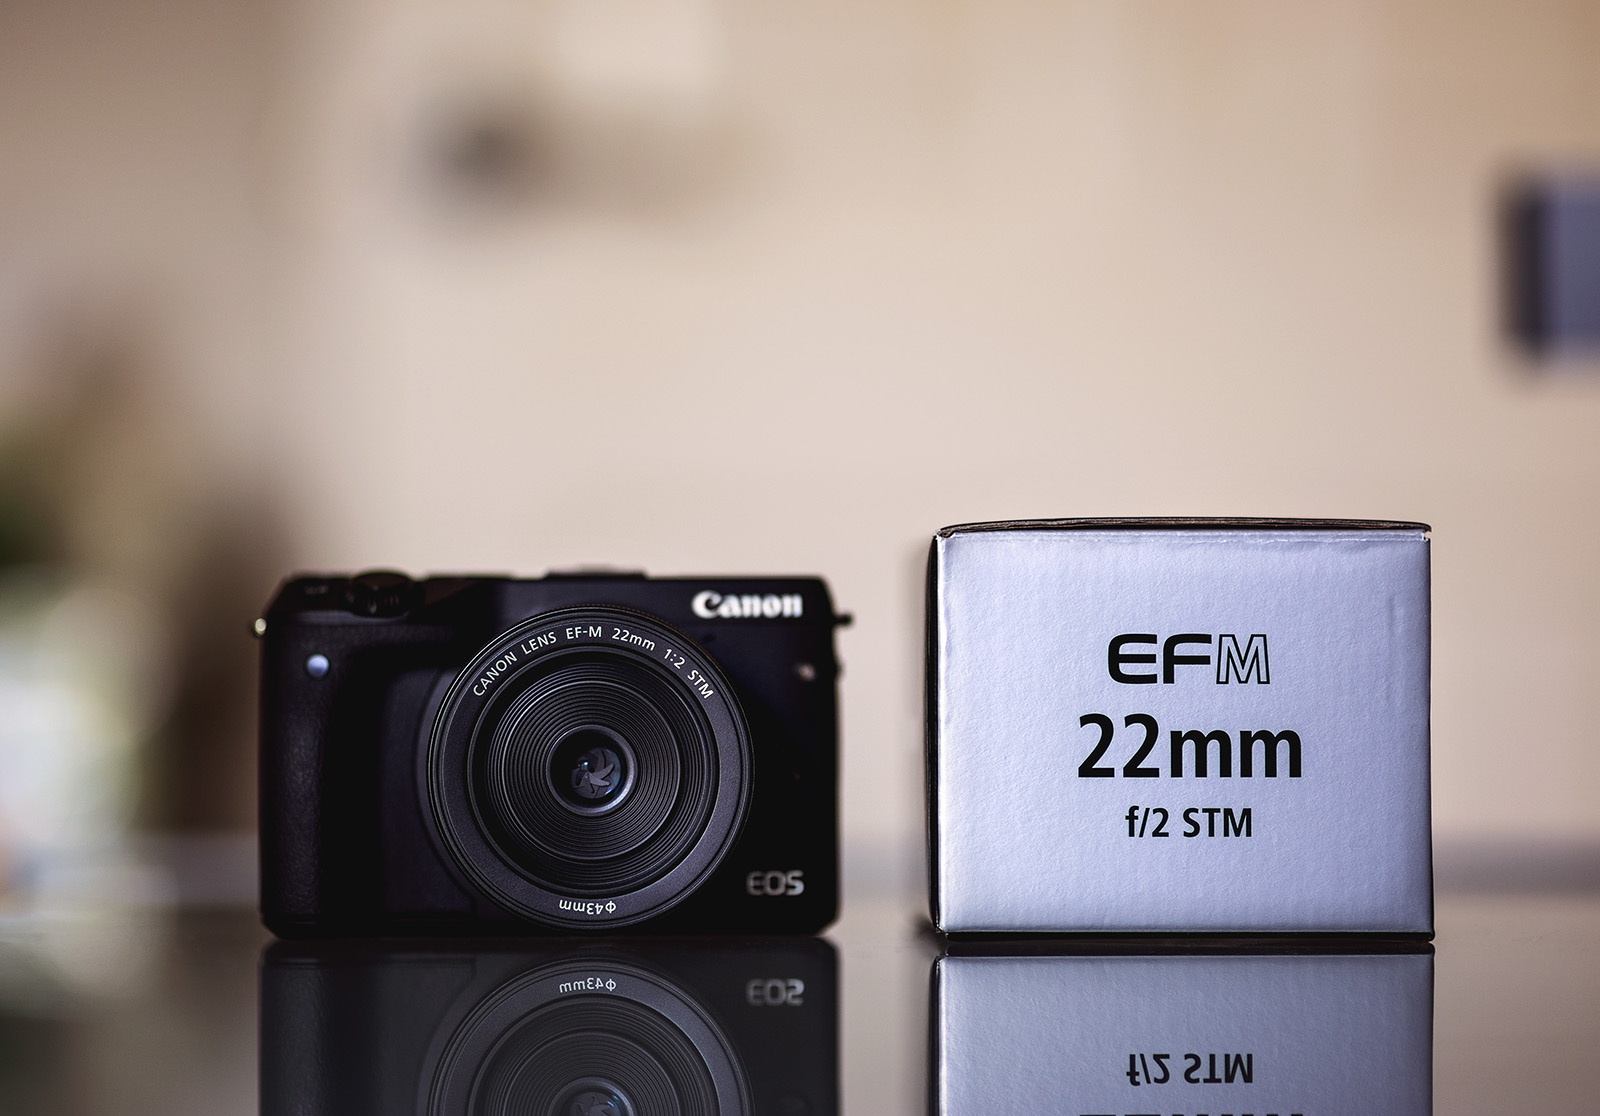 Canon EF-M 22mm F2 STM - Photos by Dlee